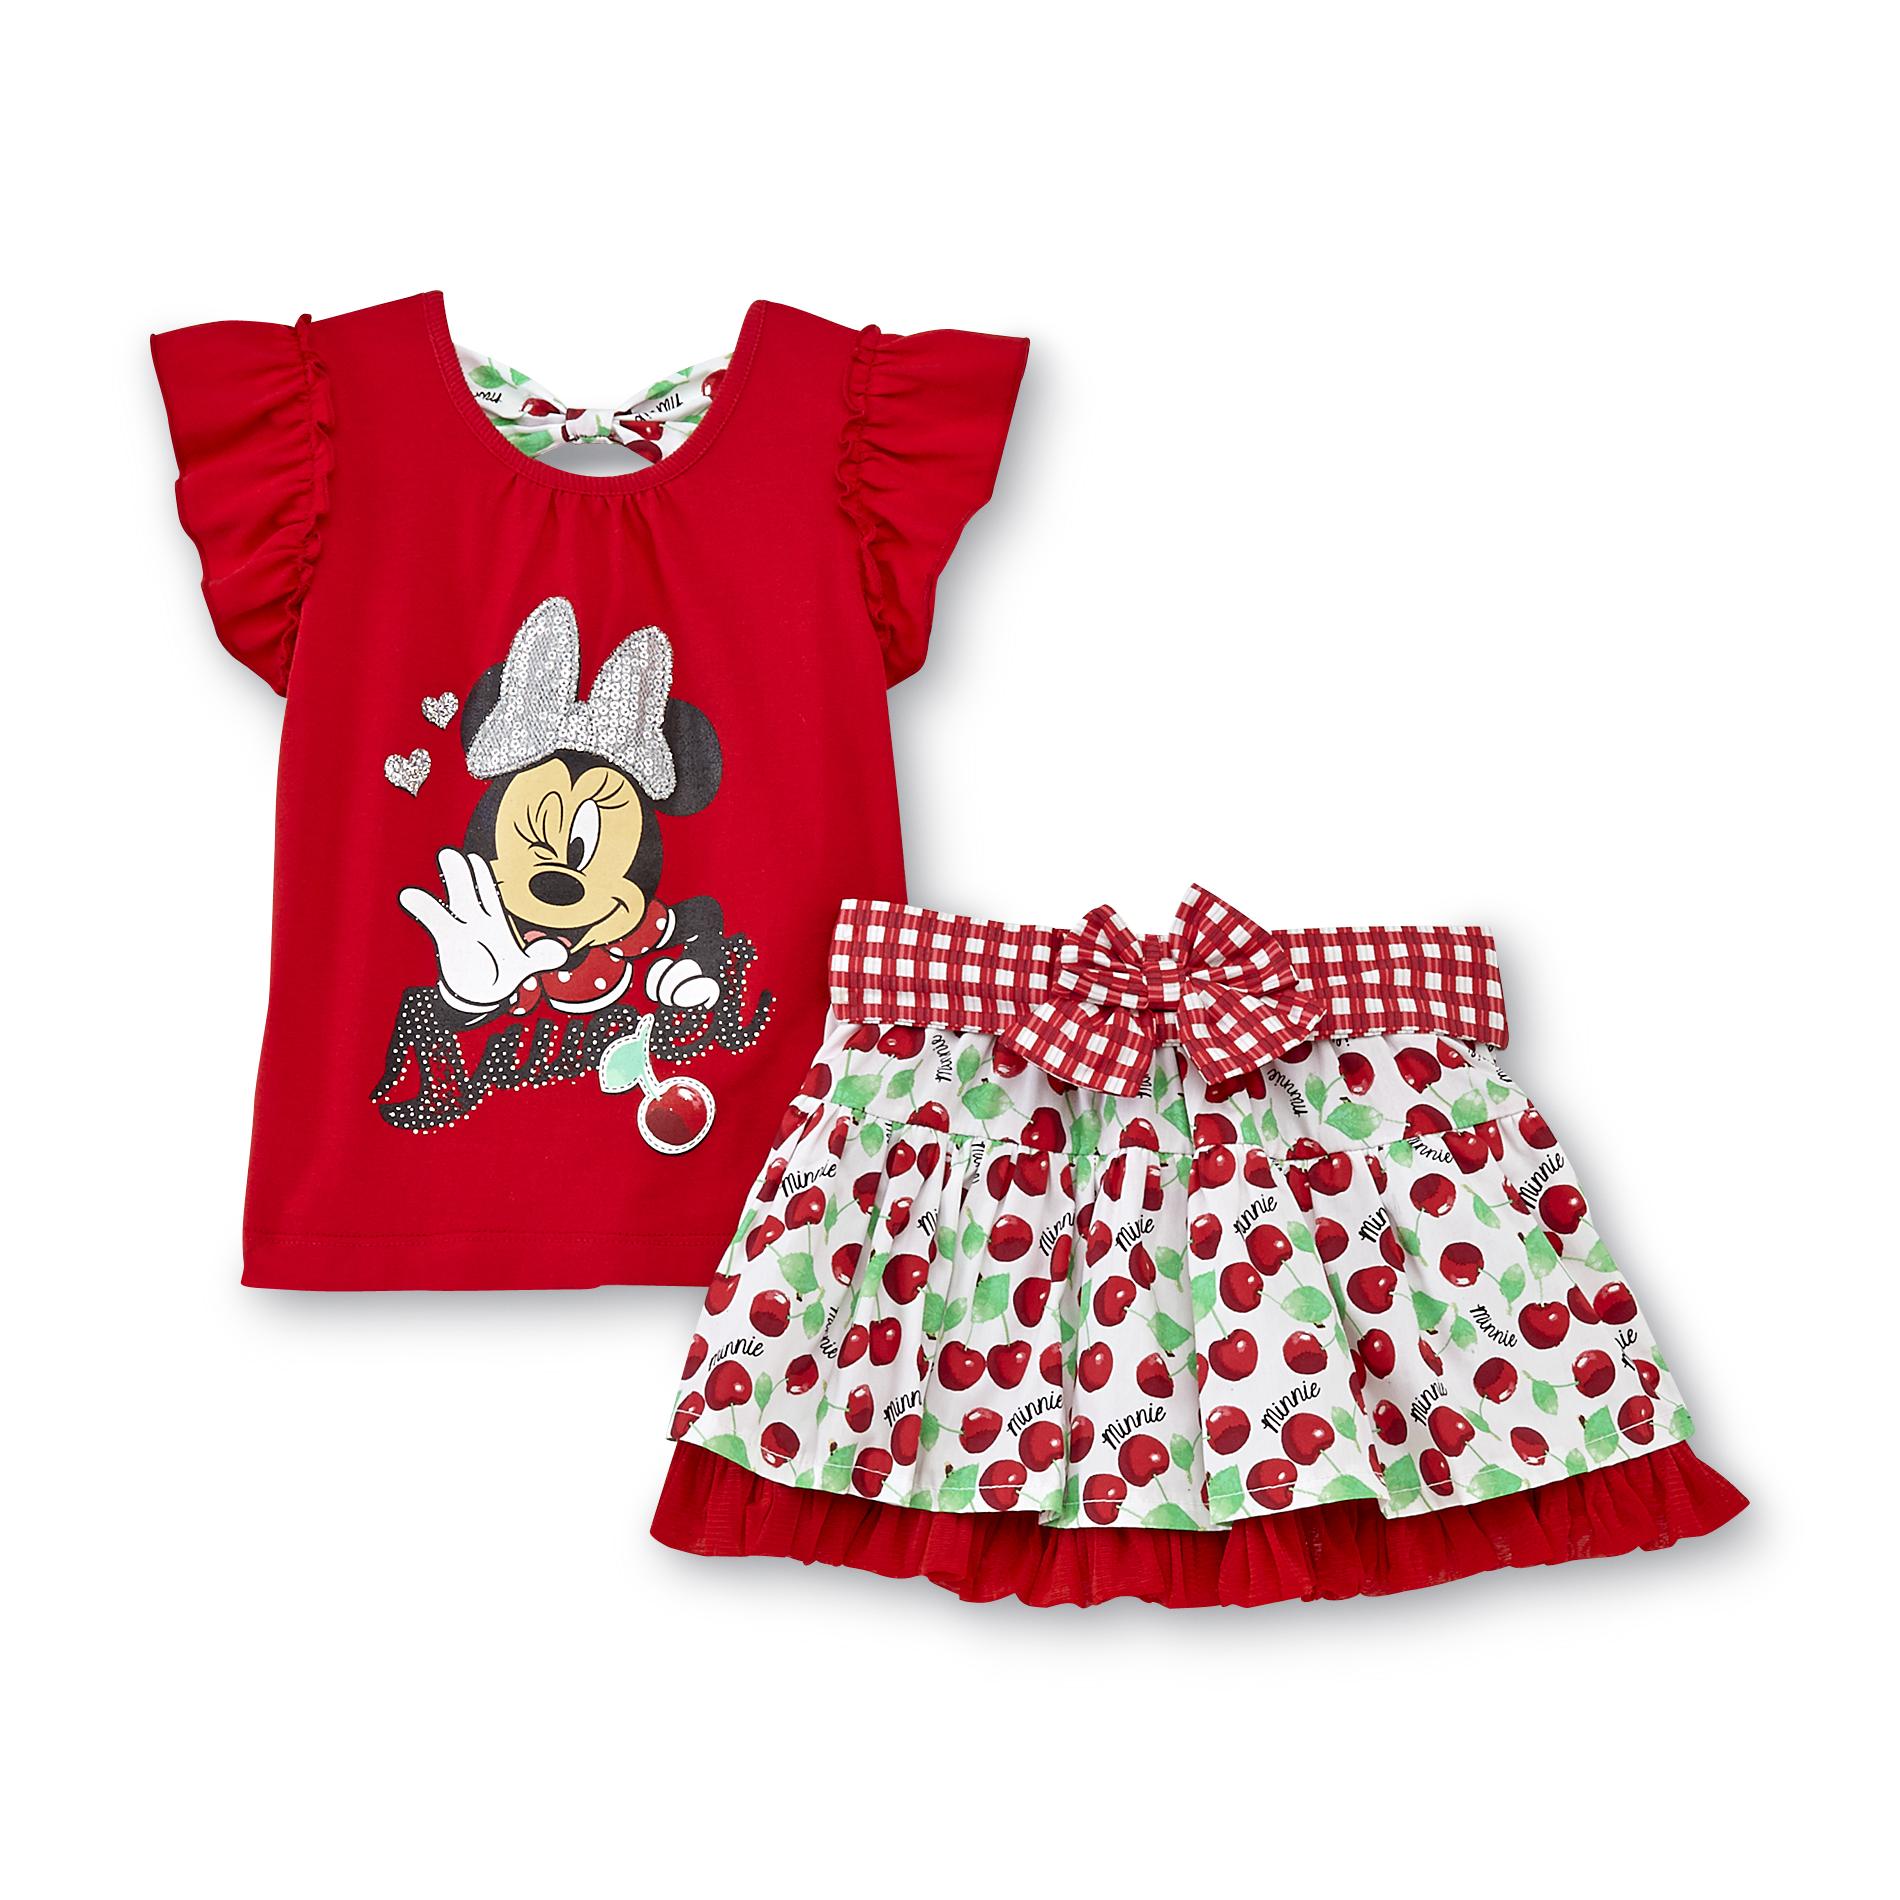 Disney Minnie Mouse Infant & Toddler Girl's Top & Scooter Skirt